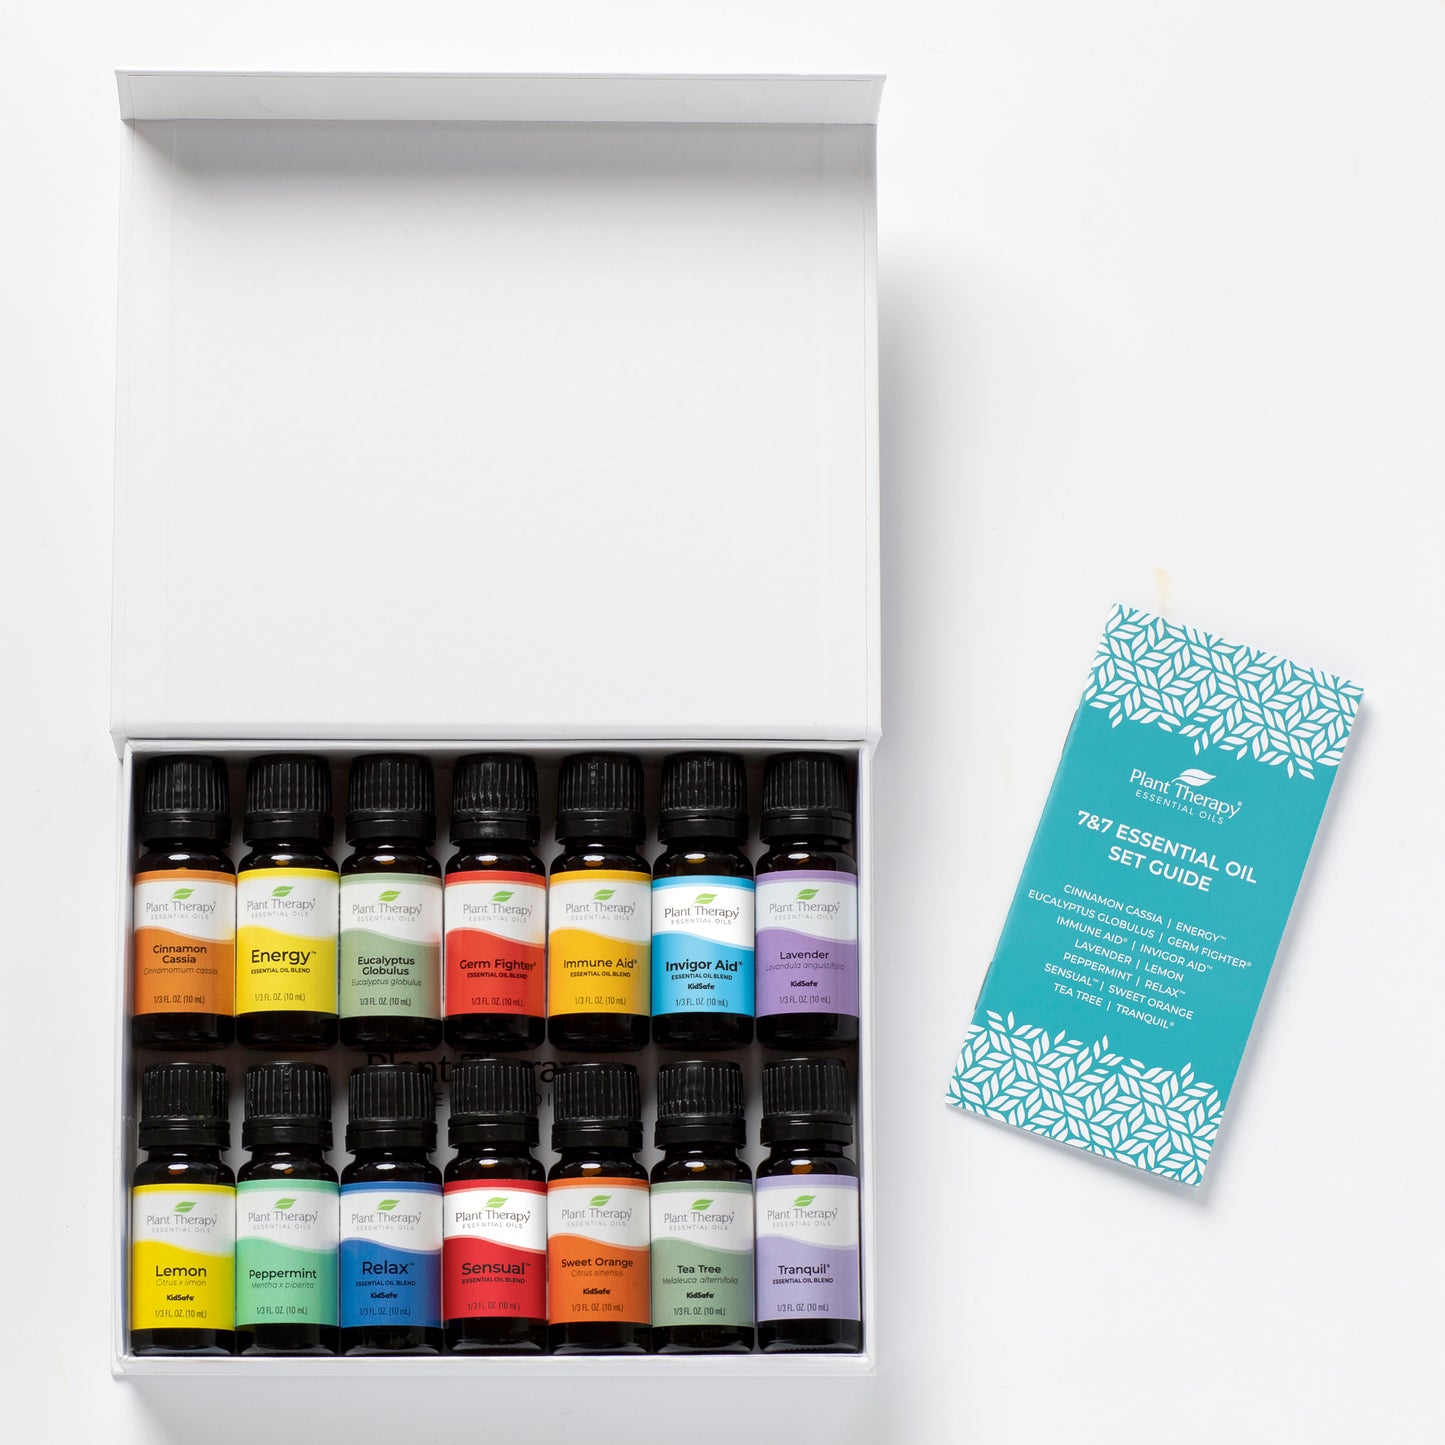 Image of 7 & 7 Essential Oil Set box and informational insert